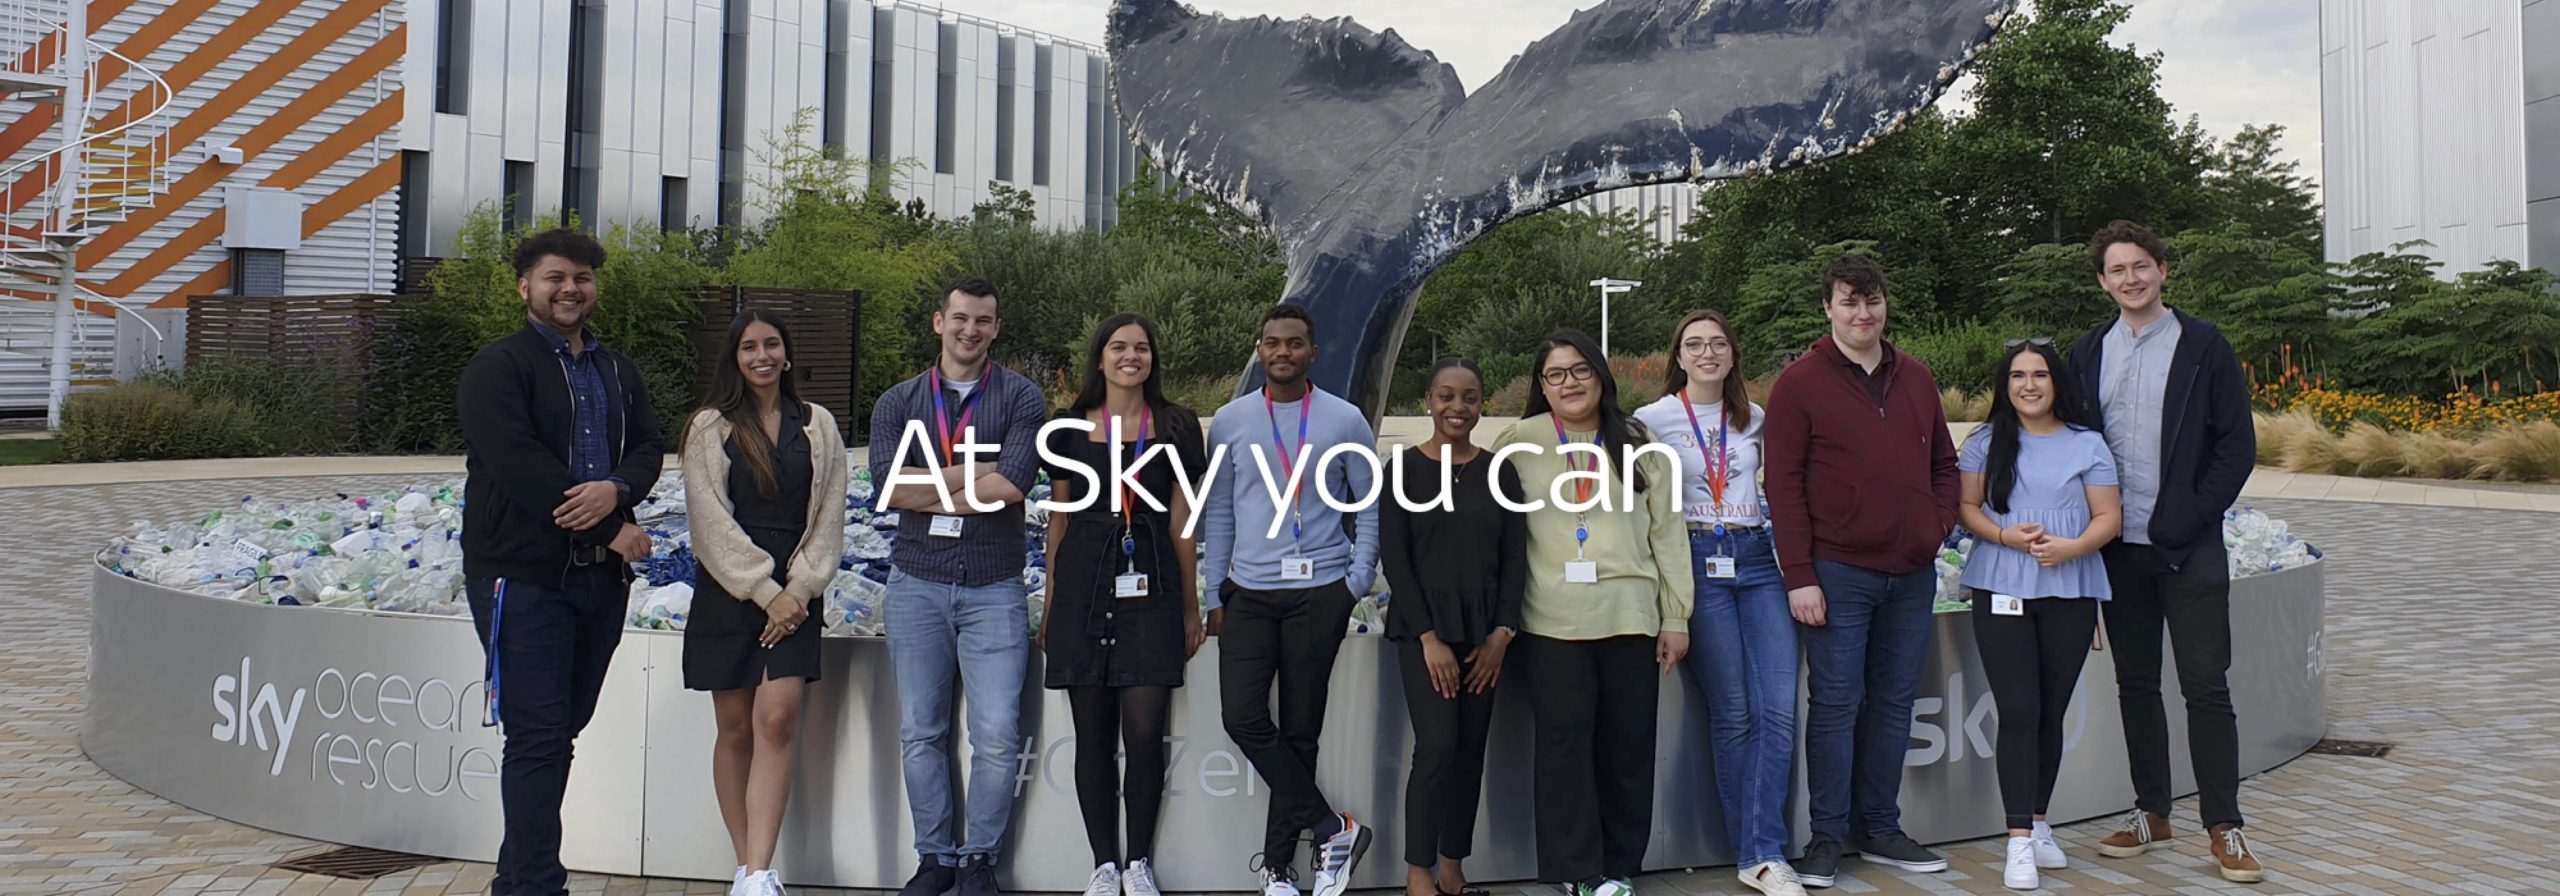 AT SKY YOU CAN